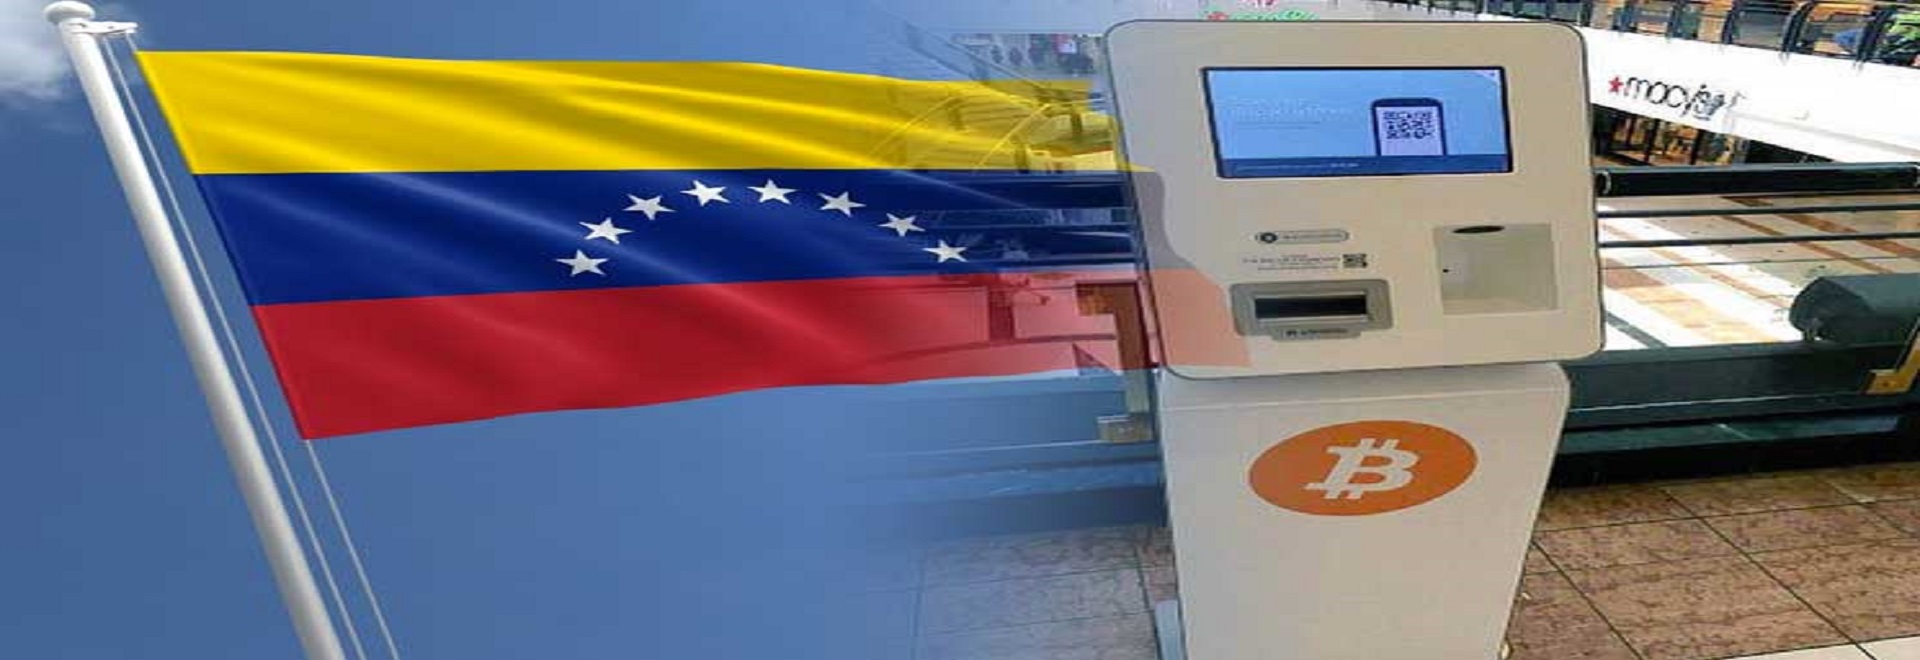 Venezuela to See the First Bitcoin ATM Installed in the Country Amid LocalBitcoins Closing - اخبار شنبه مورخ 98/6/23